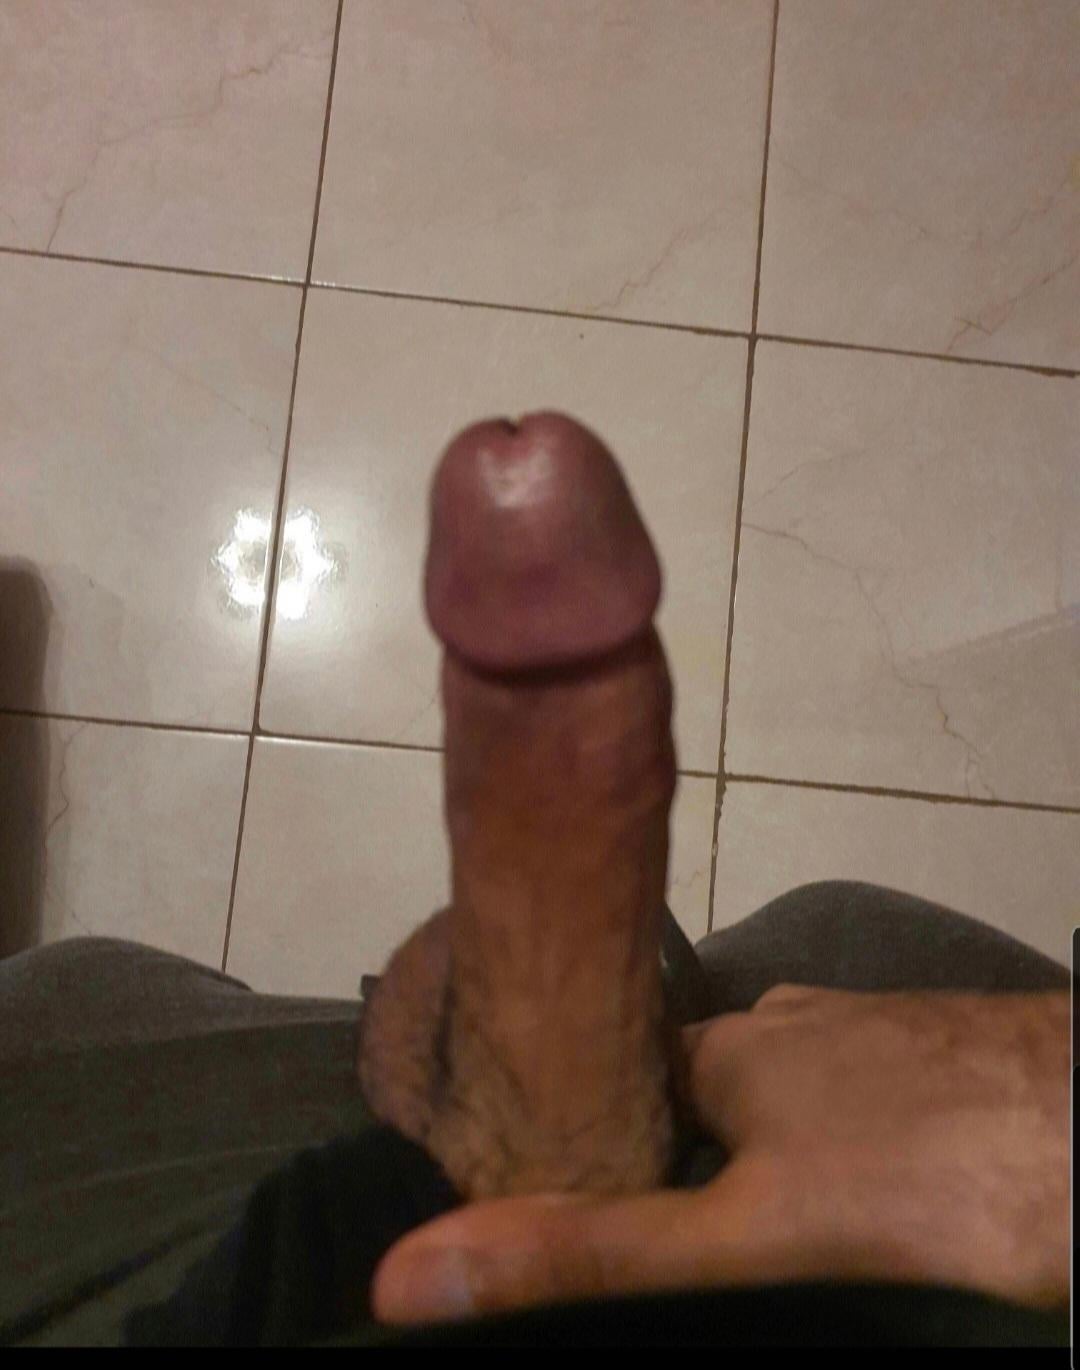 27 precum leaking Cock looking for fun snap chemical rich1